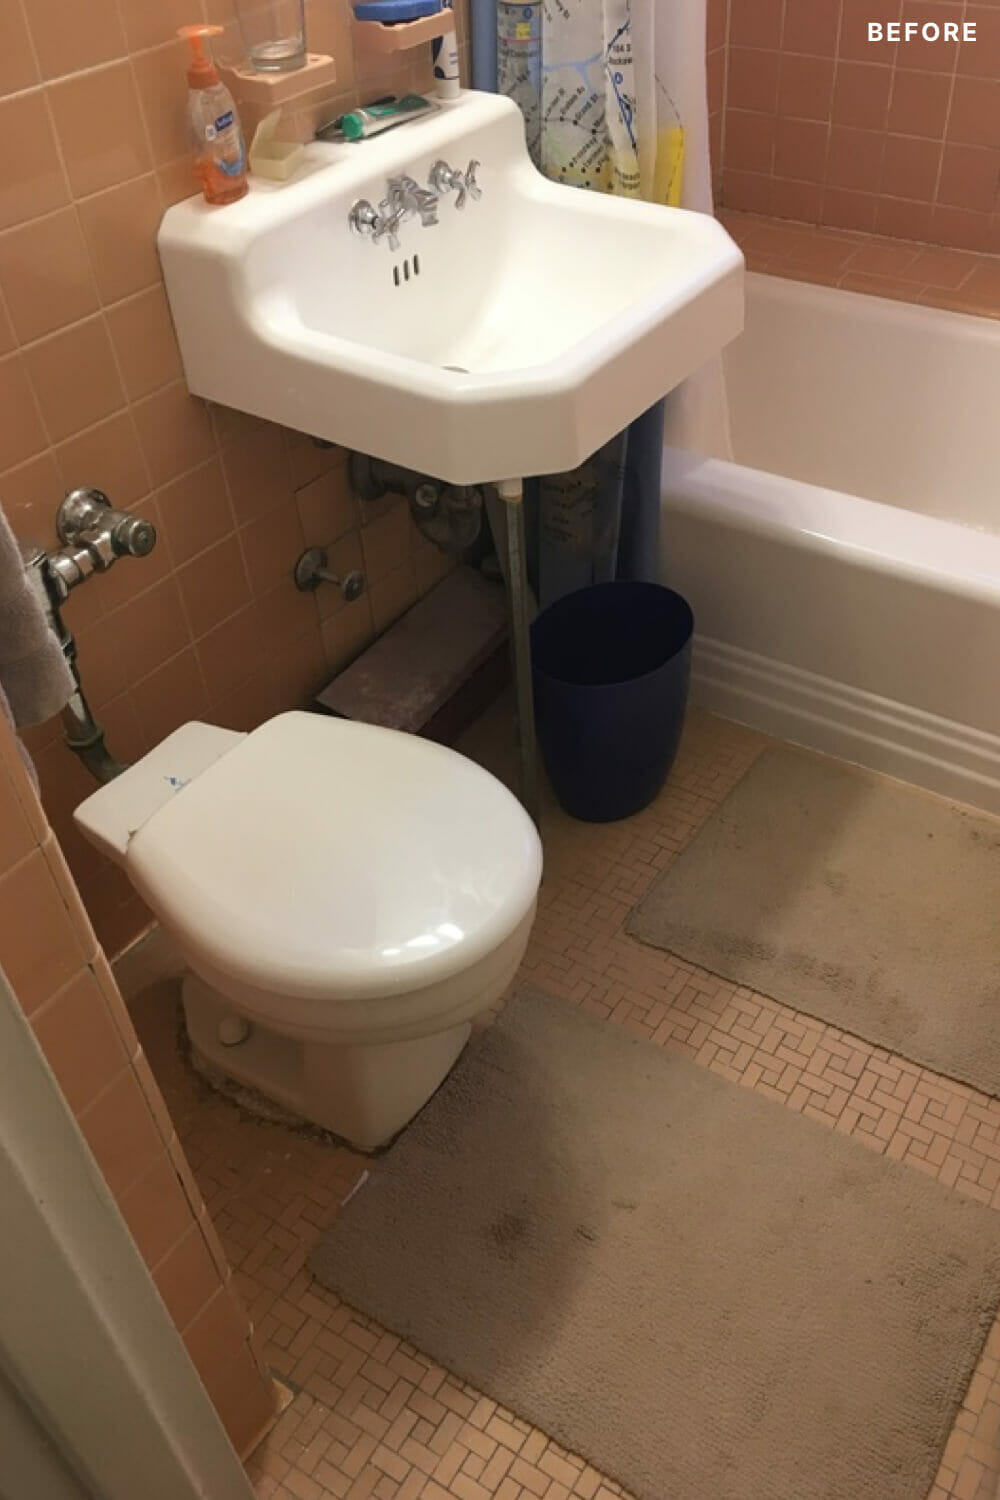 White pedestal sink with bathtub and toilet in an orange bathroom space before renovation